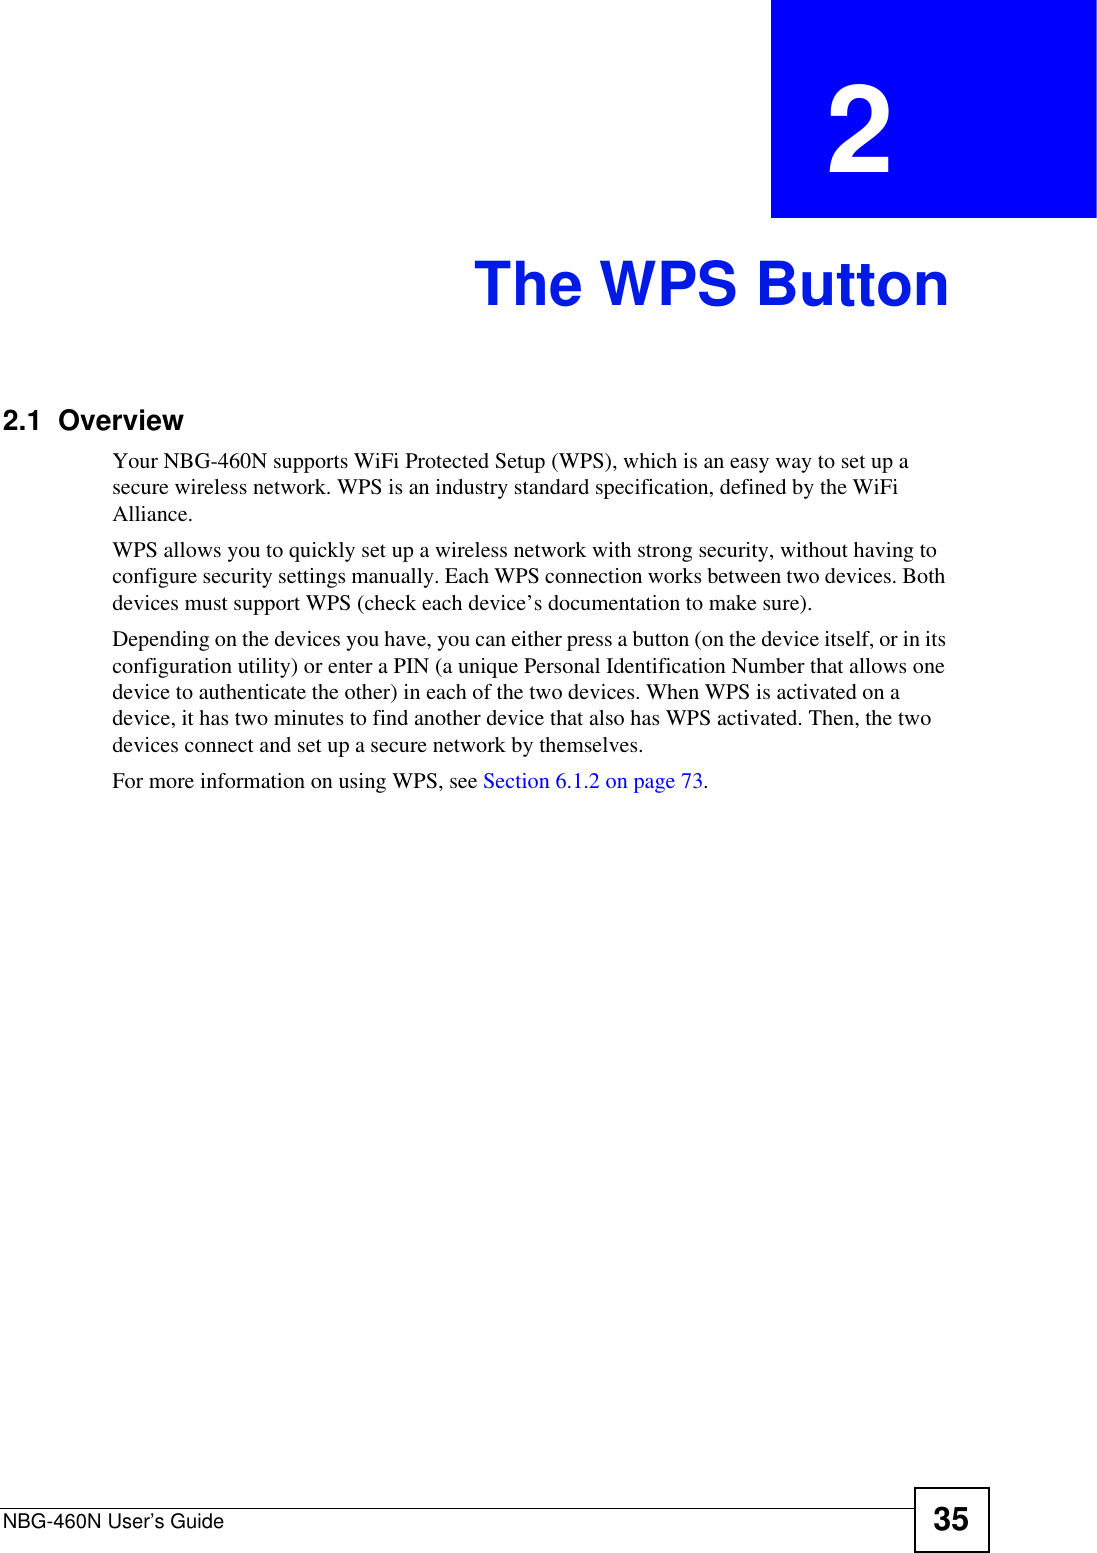 NBG-460N User’s Guide 35CHAPTER  2 The WPS Button2.1  OverviewYour NBG-460N supports WiFi Protected Setup (WPS), which is an easy way to set up a secure wireless network. WPS is an industry standard specification, defined by the WiFi Alliance.WPS allows you to quickly set up a wireless network with strong security, without having to configure security settings manually. Each WPS connection works between two devices. Both devices must support WPS (check each device’s documentation to make sure). Depending on the devices you have, you can either press a button (on the device itself, or in its configuration utility) or enter a PIN (a unique Personal Identification Number that allows one device to authenticate the other) in each of the two devices. When WPS is activated on a device, it has two minutes to find another device that also has WPS activated. Then, the two devices connect and set up a secure network by themselves.For more information on using WPS, see Section 6.1.2 on page 73.